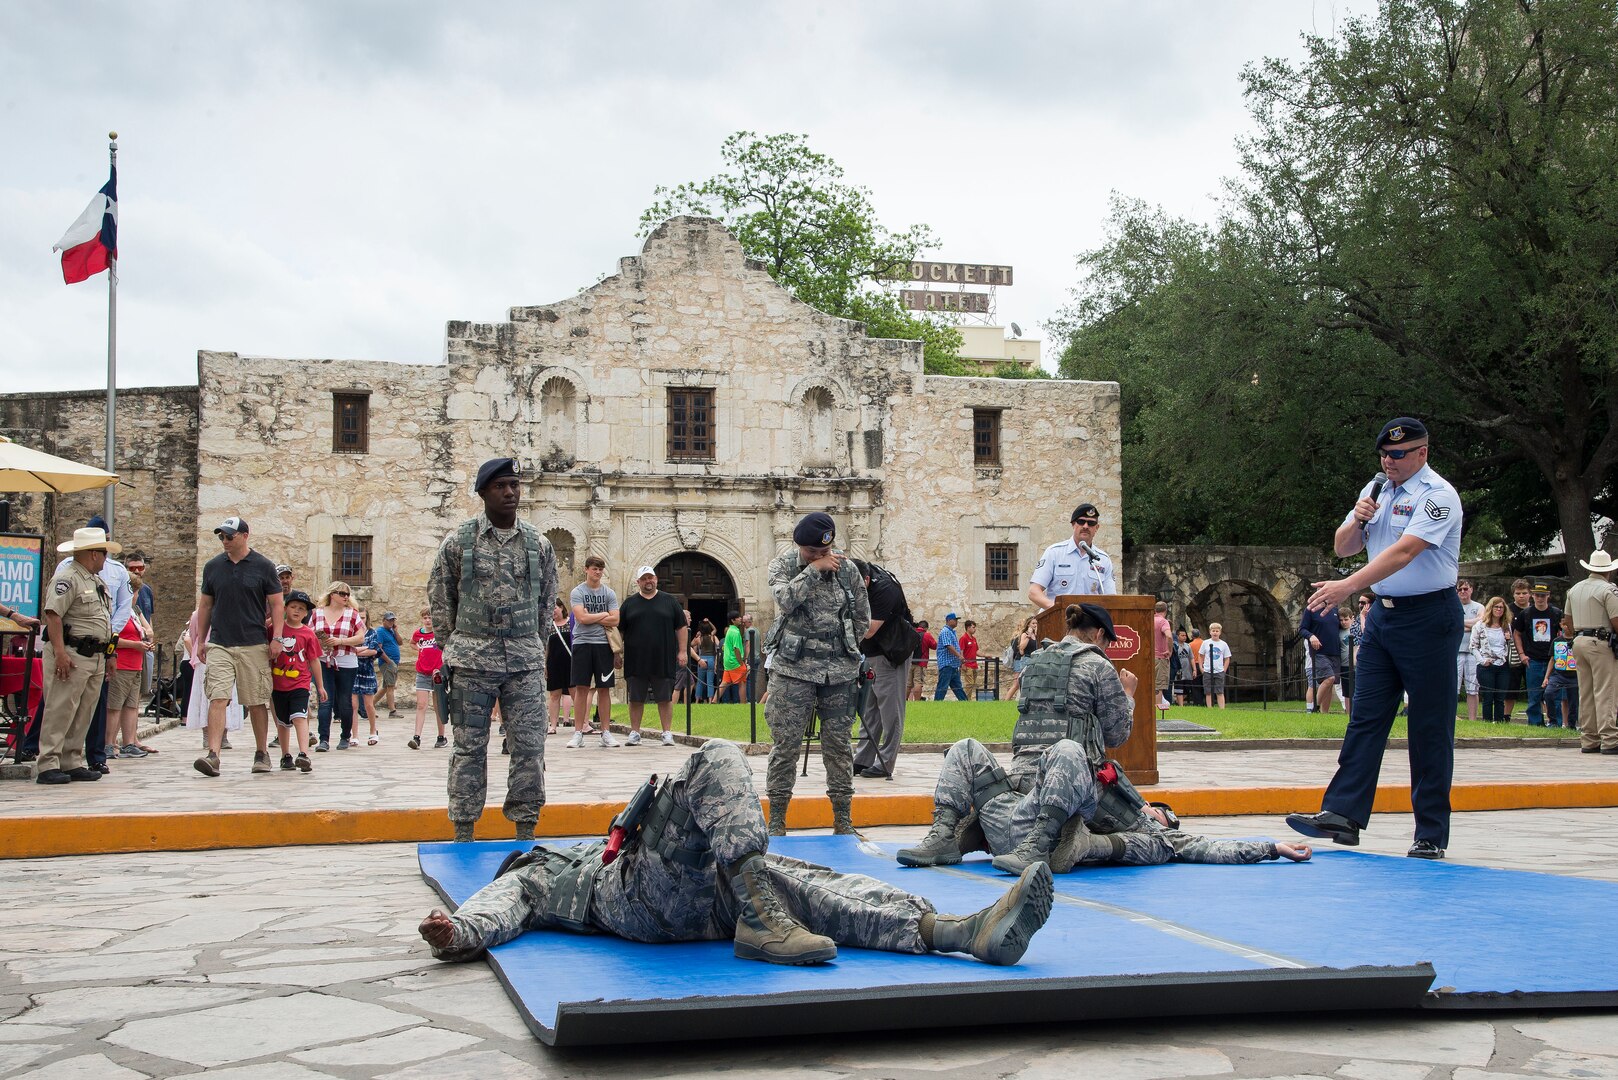 Members of the 343rd Training Squadron, perform apprehension techniques during San Antonio’s Fiesta Air Force Day at the Alamo, April 22, 2019. From its beginning in 1891, Fiesta has grown into an annual celebration that includes civic and military observances, street and river parades, exhibits, pilgrimages and memorials.